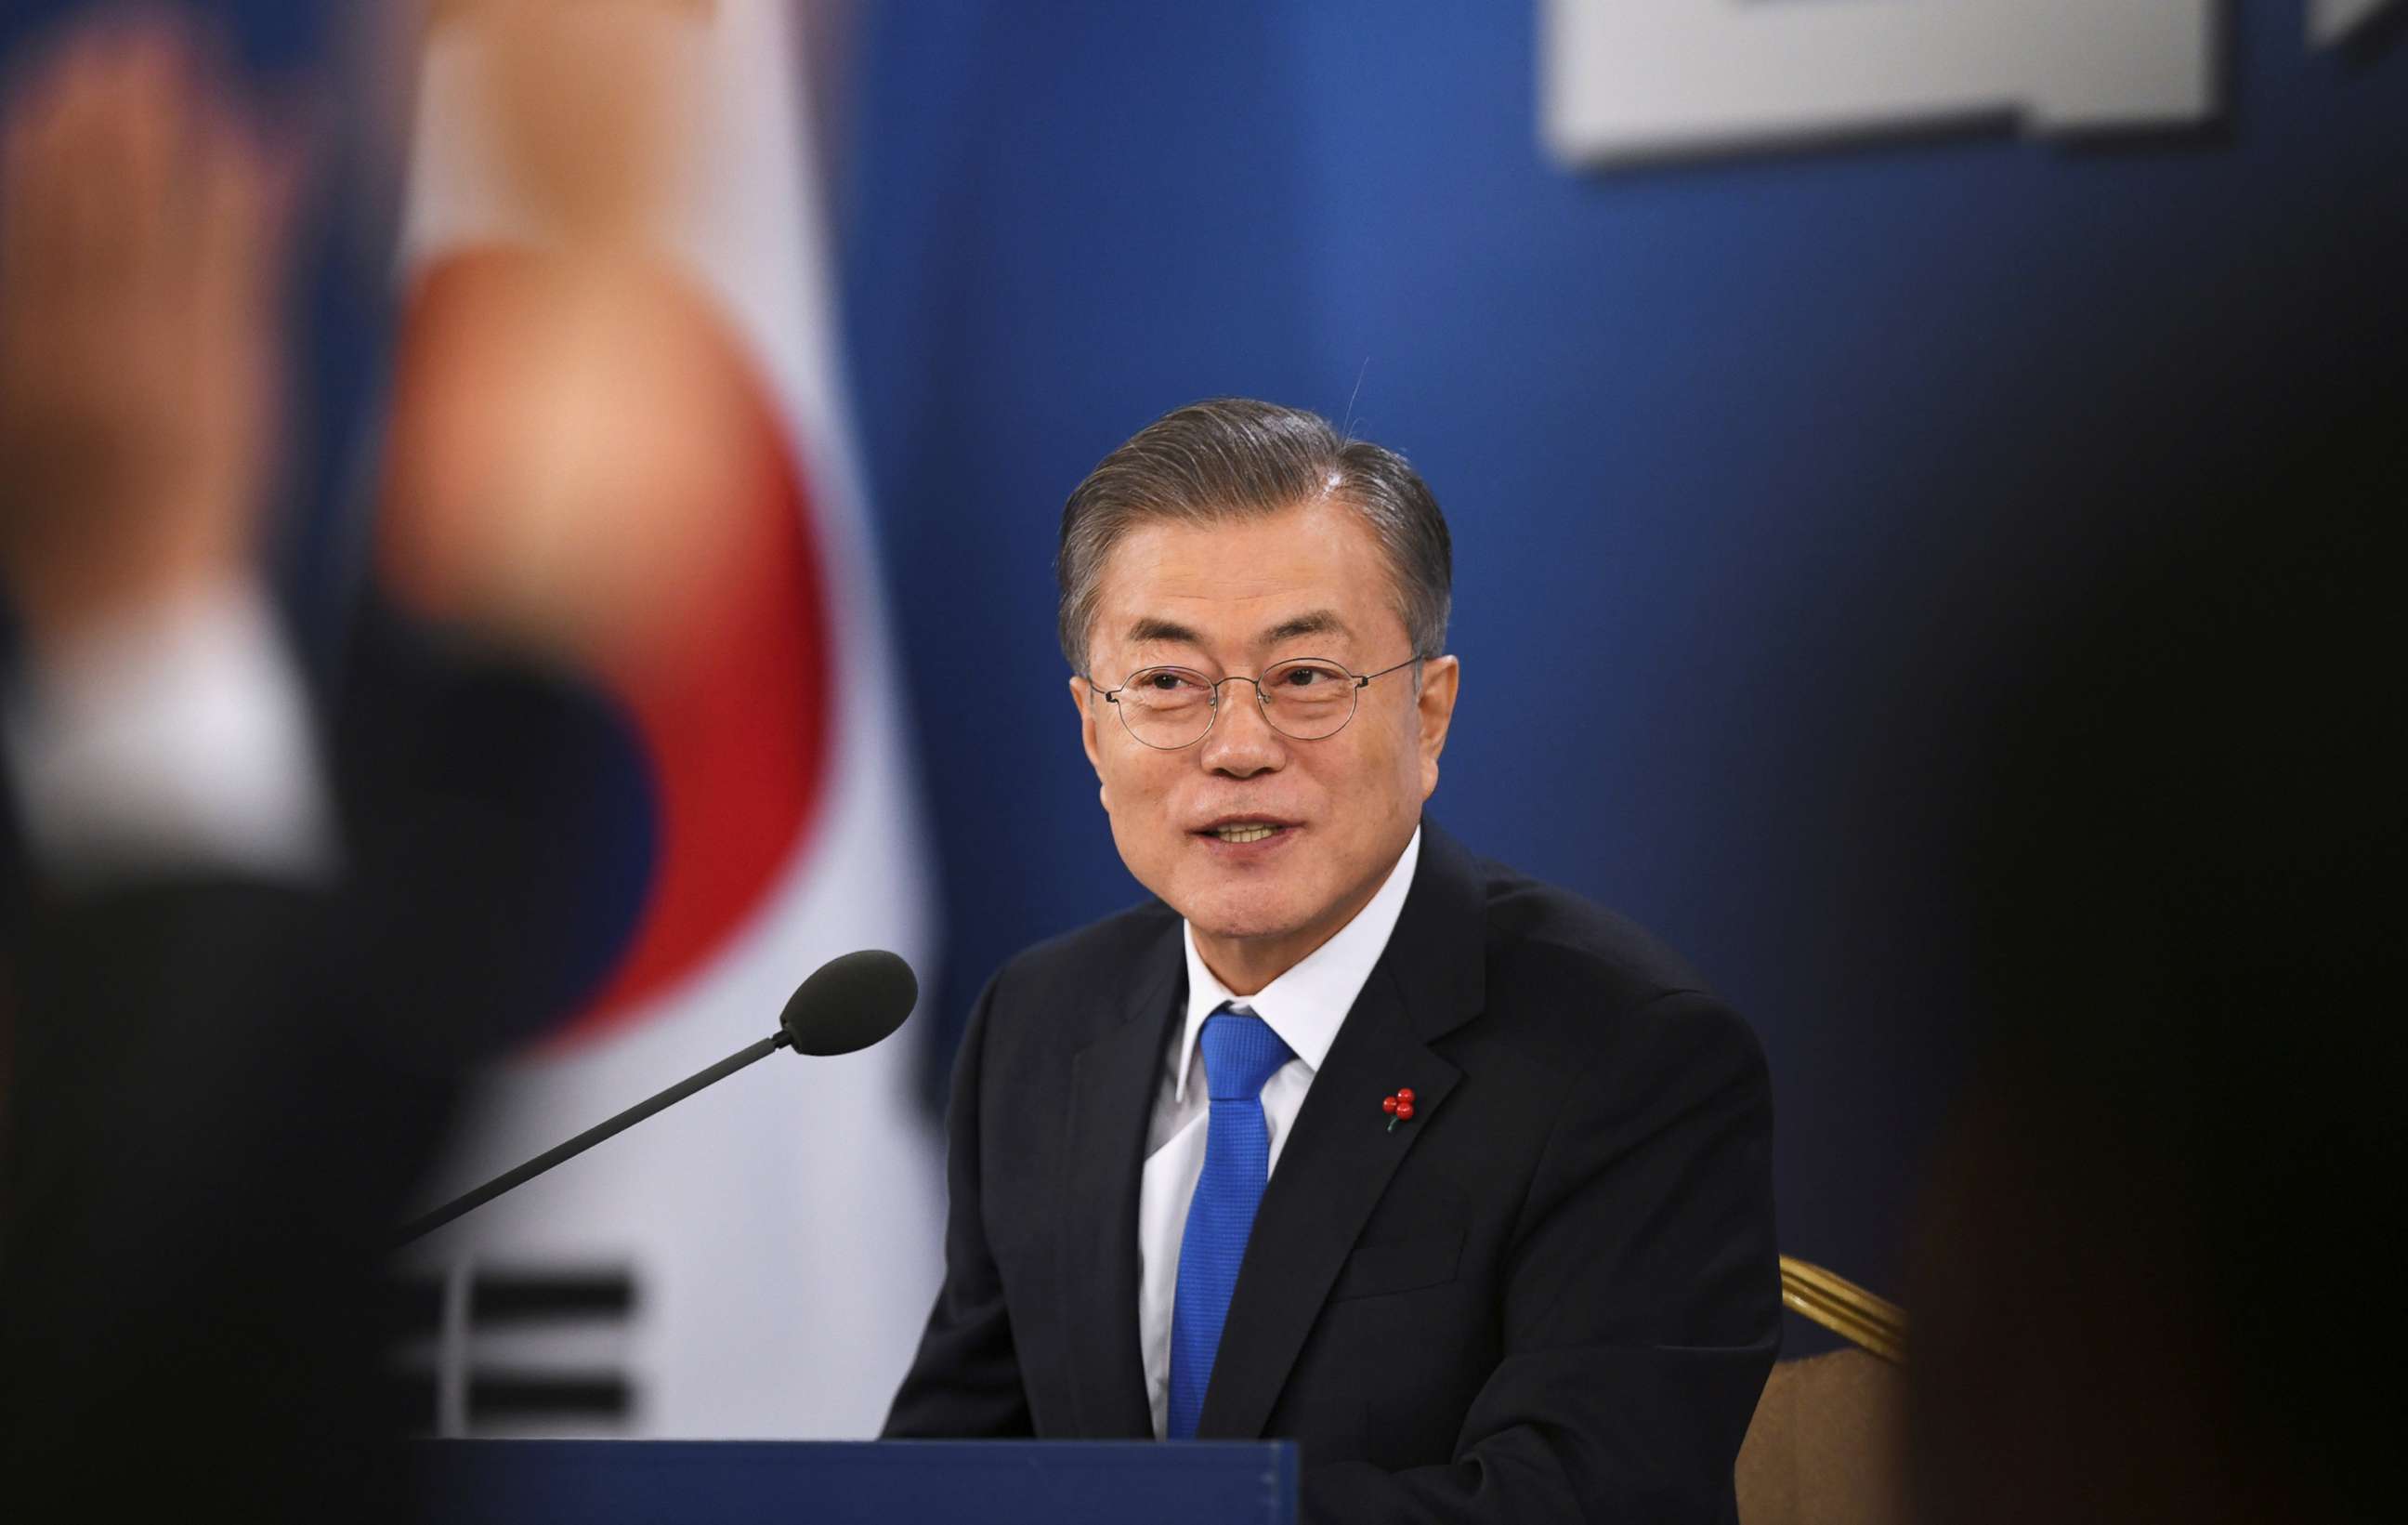 PHOTO: South Korean President Moon Jae-in holds a press conference at the presidential Blue House in Seoul, Jan. 10, 2019.